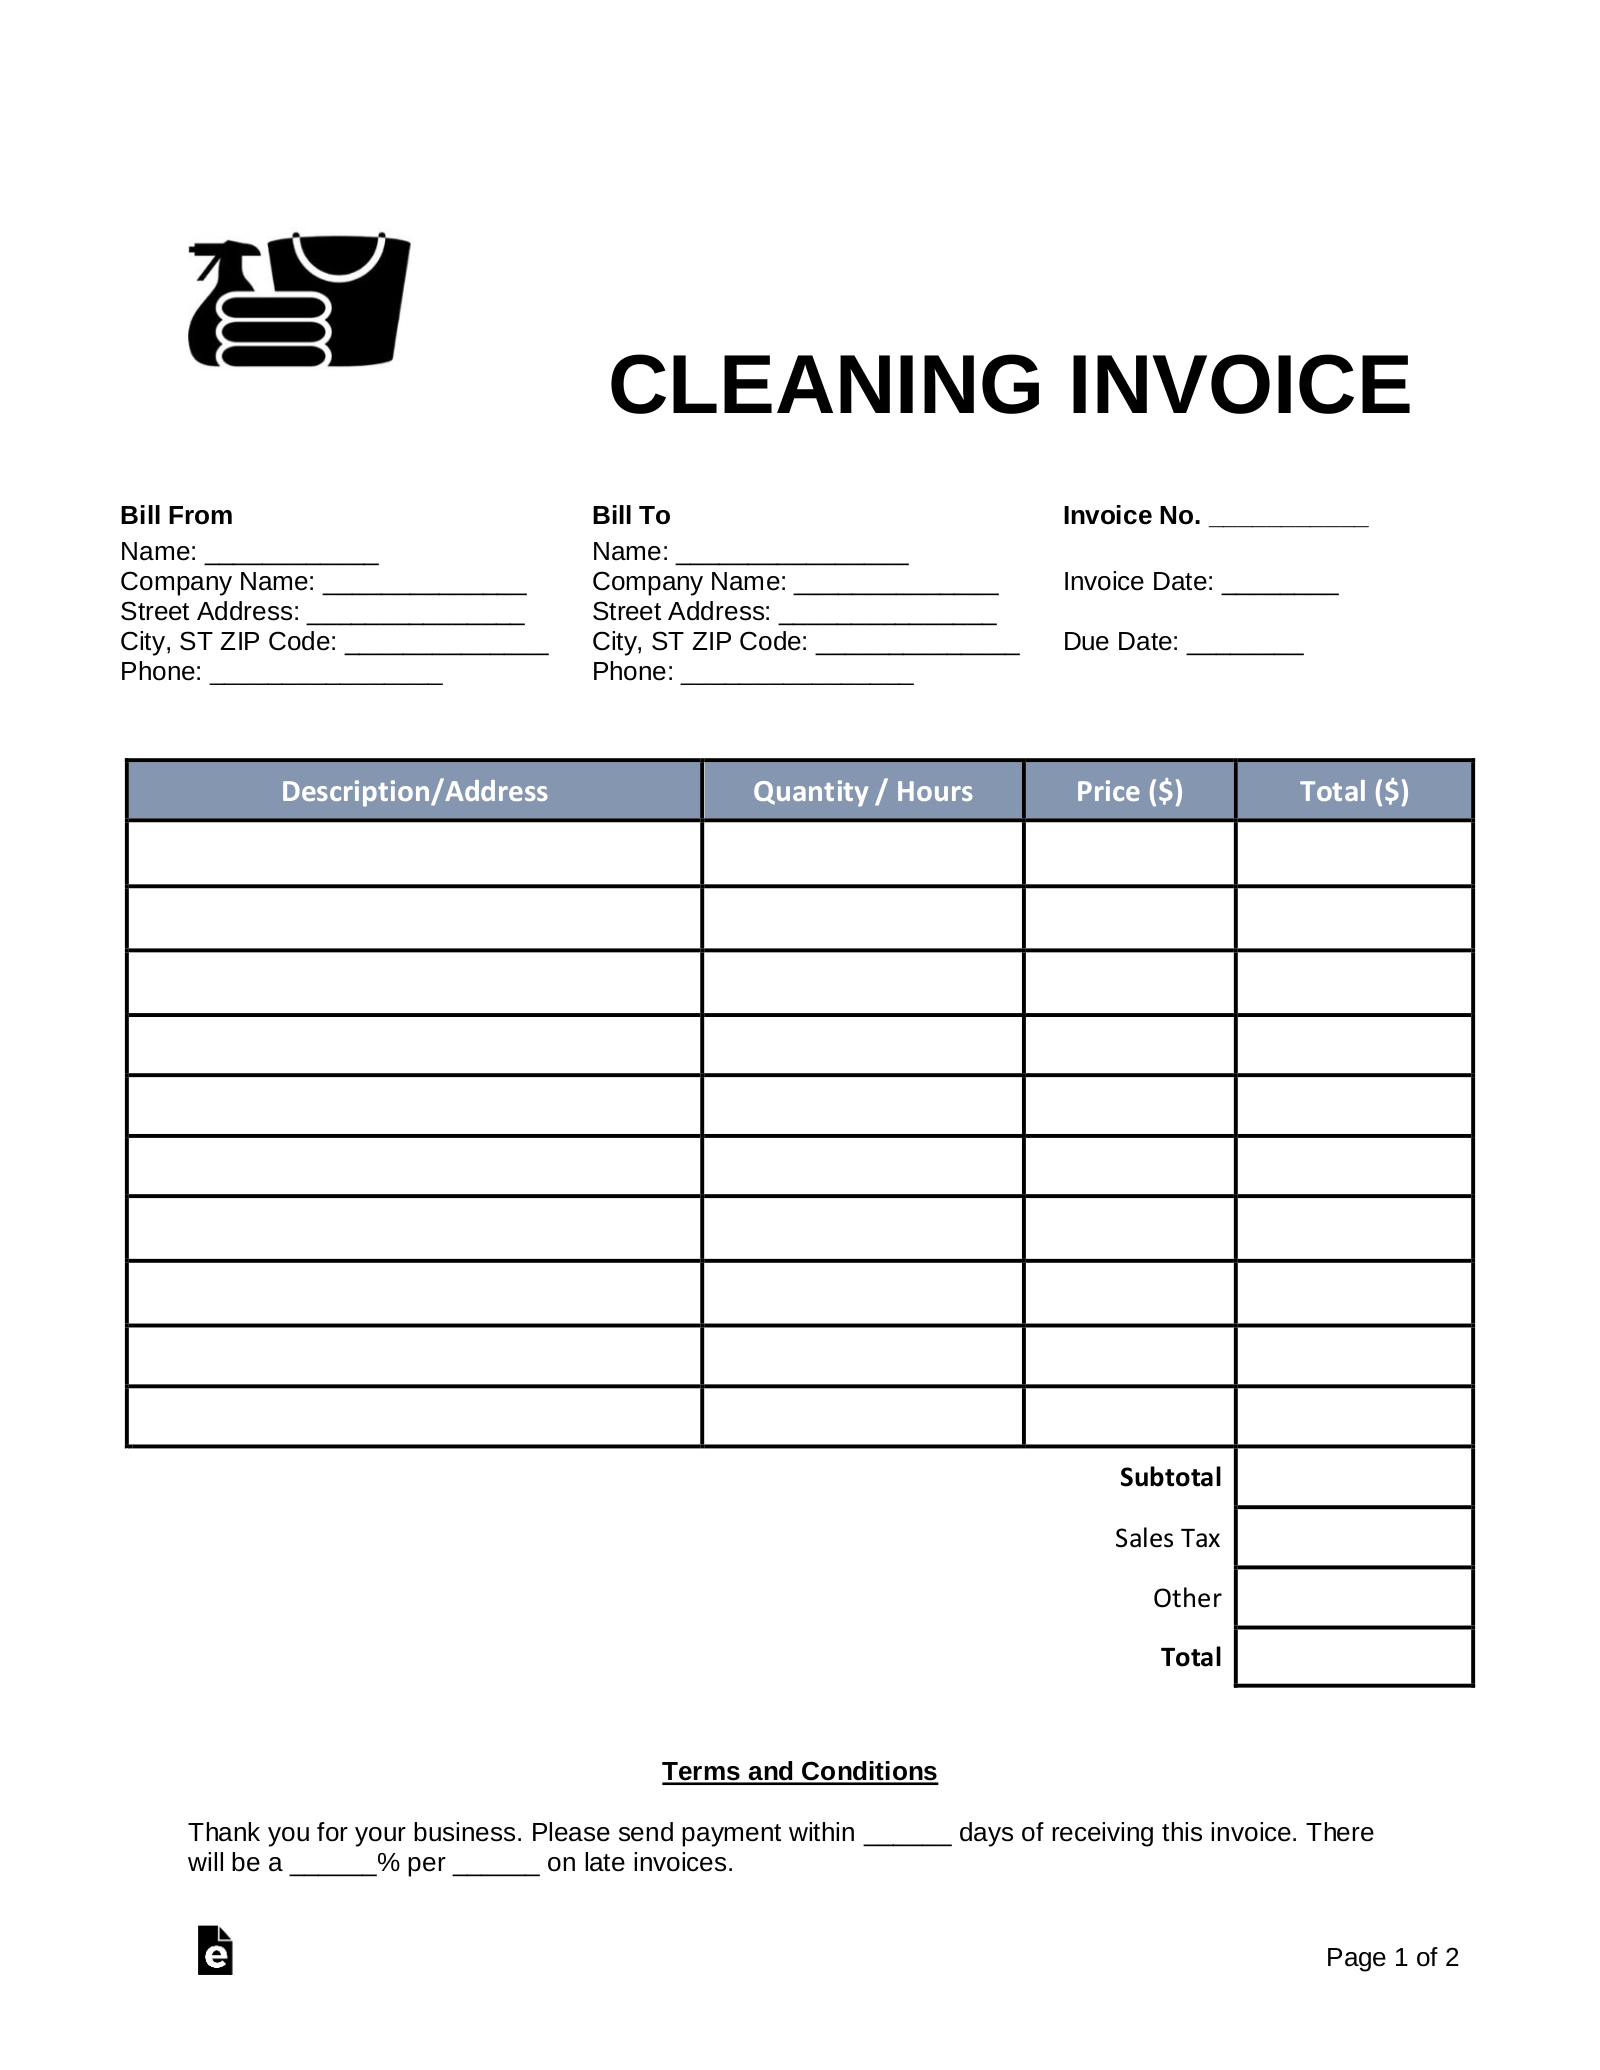 Cleaning (Housekeeping) Invoice Template